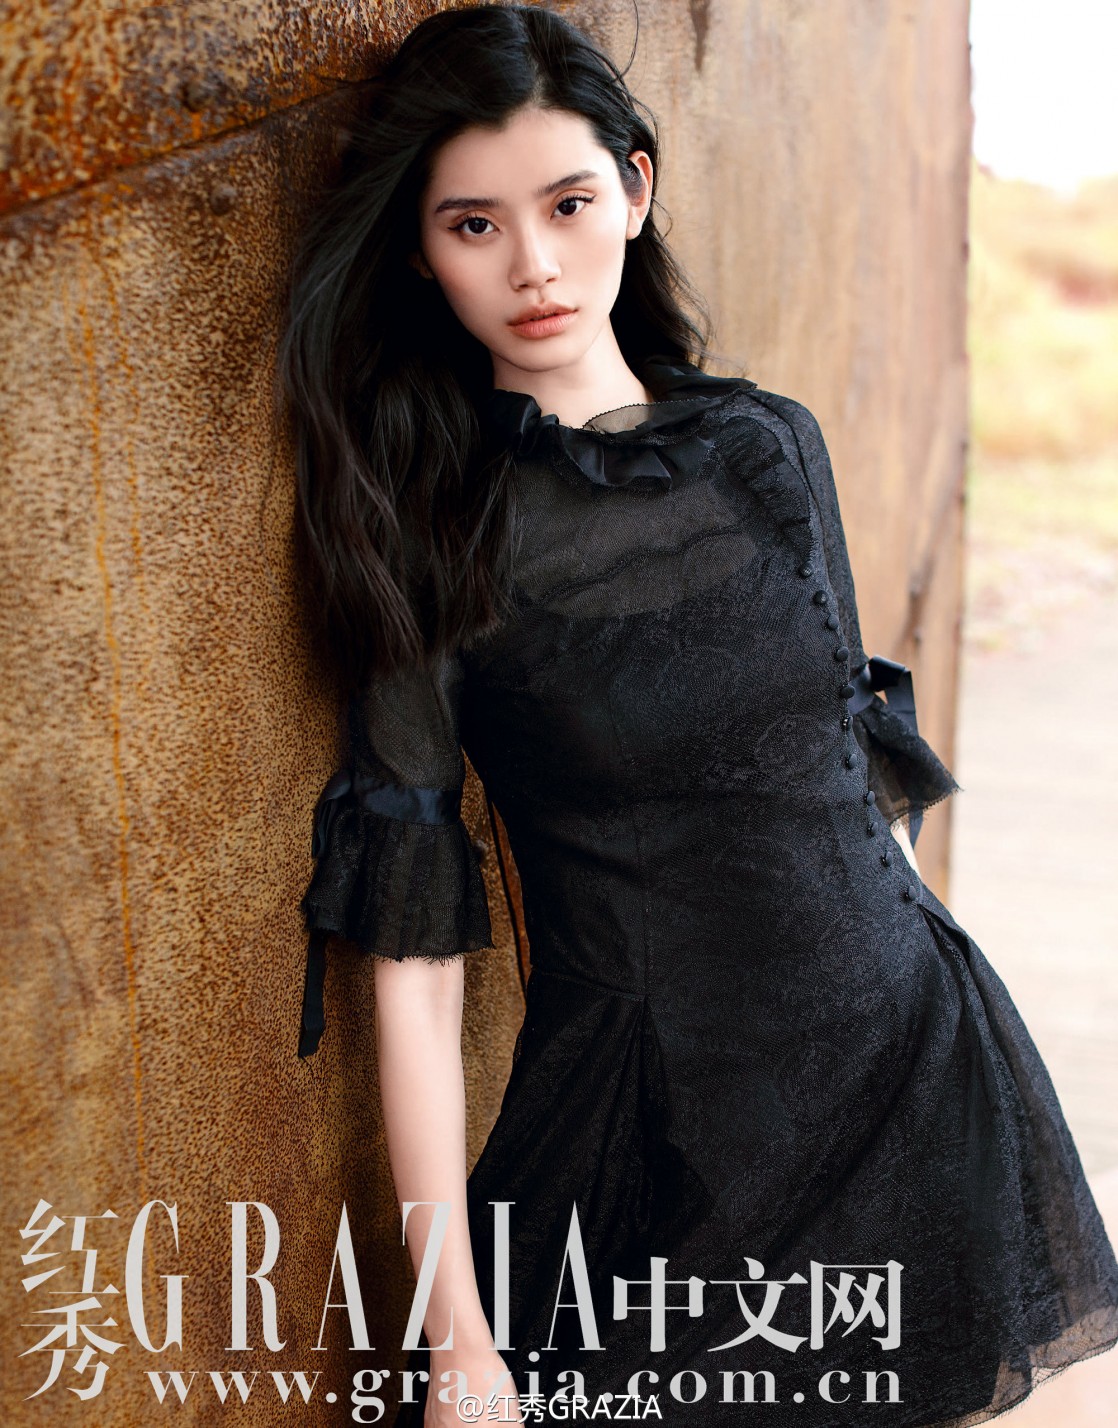 Ming Xi Pictures (1404 Images) image